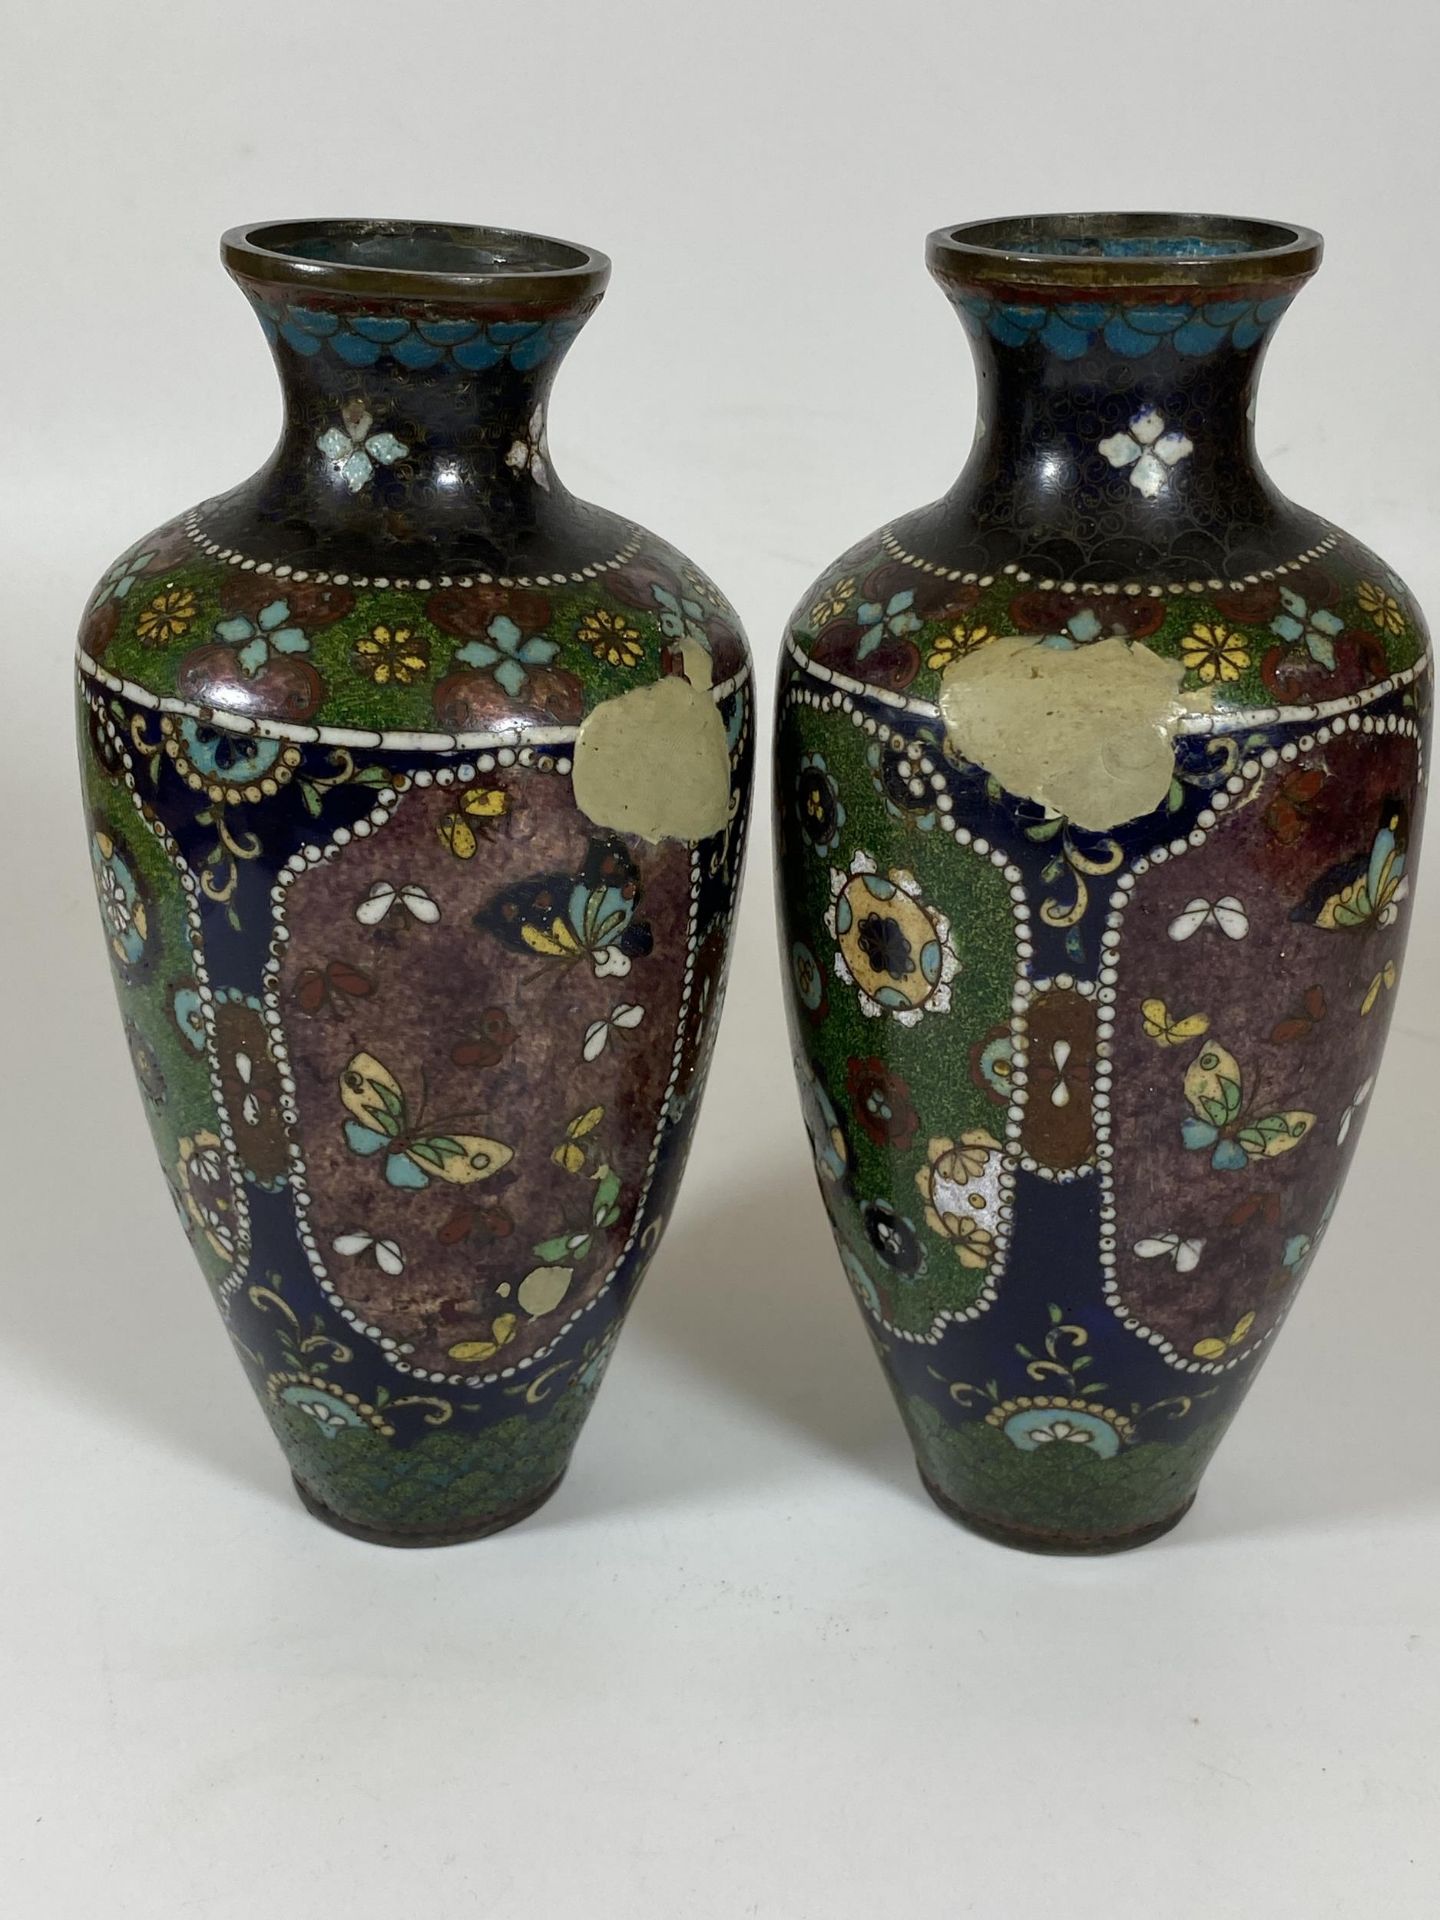 A PAIR OF JAPANESE MEIJI PERIOD (1868-1912) BUTTERFLY DESIGN CLOISONNE VASES, HEIGHT 19CM - Image 2 of 4